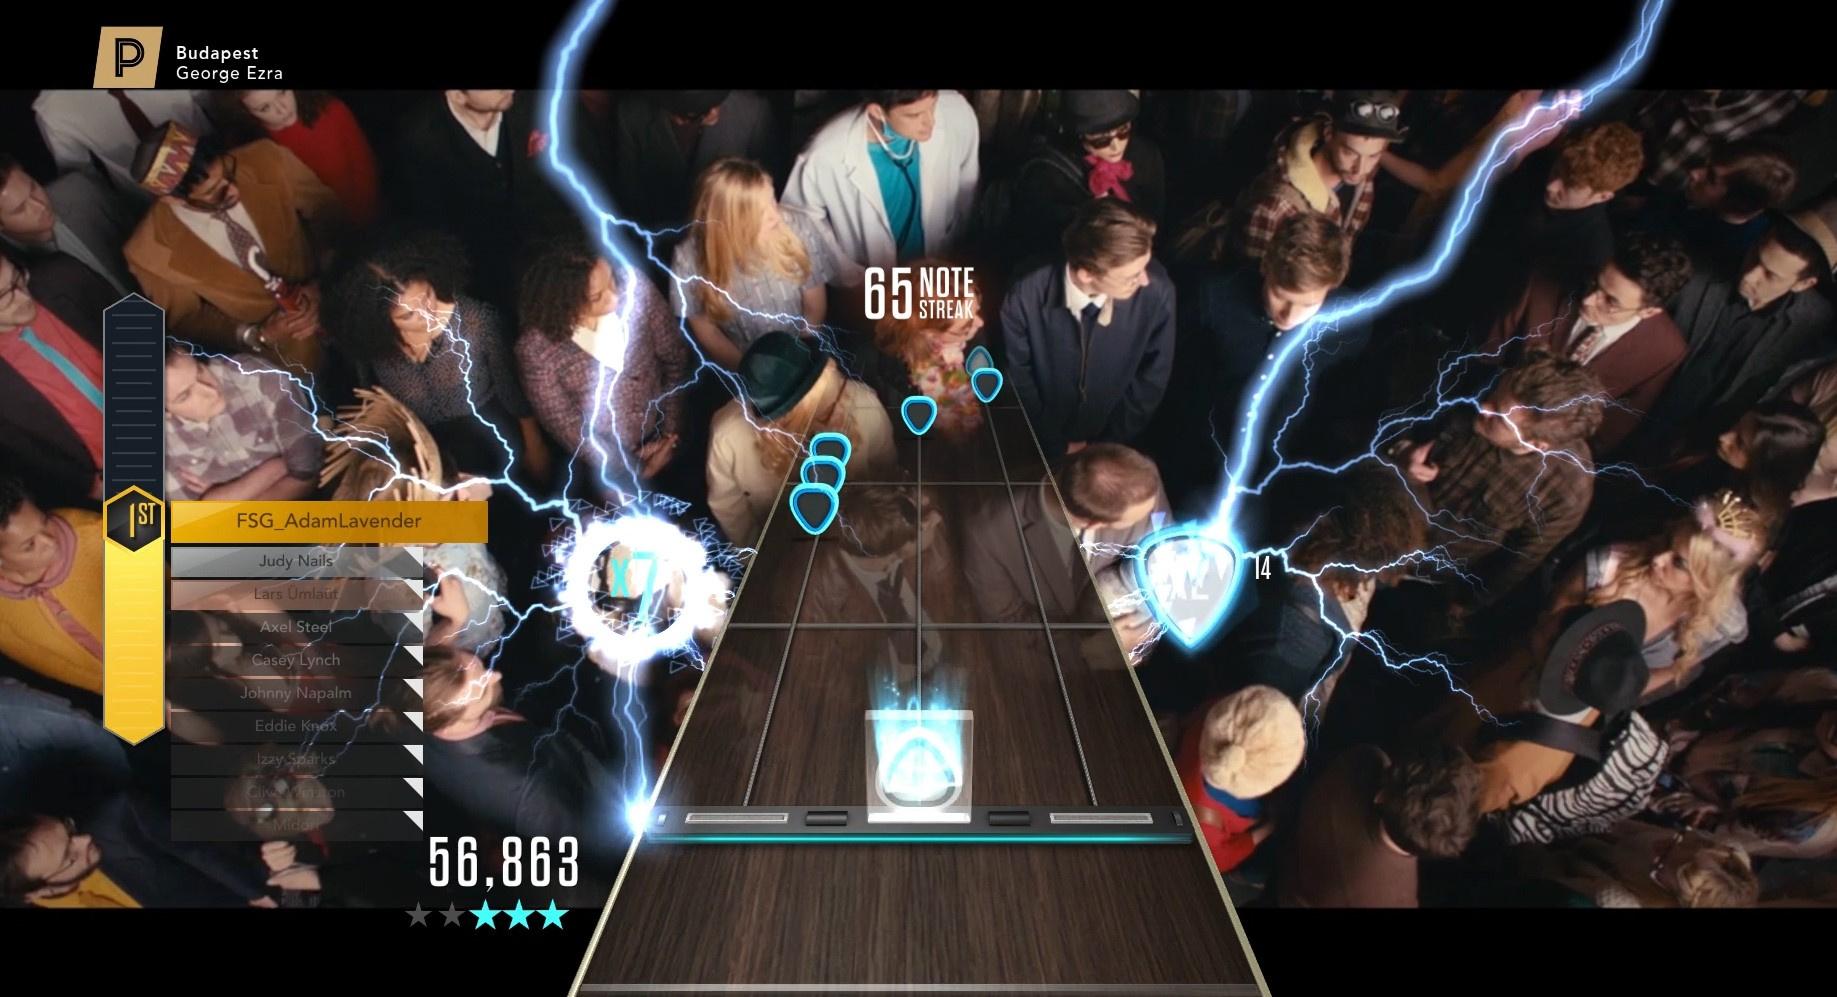 can you play guitar hero on nintendo switch